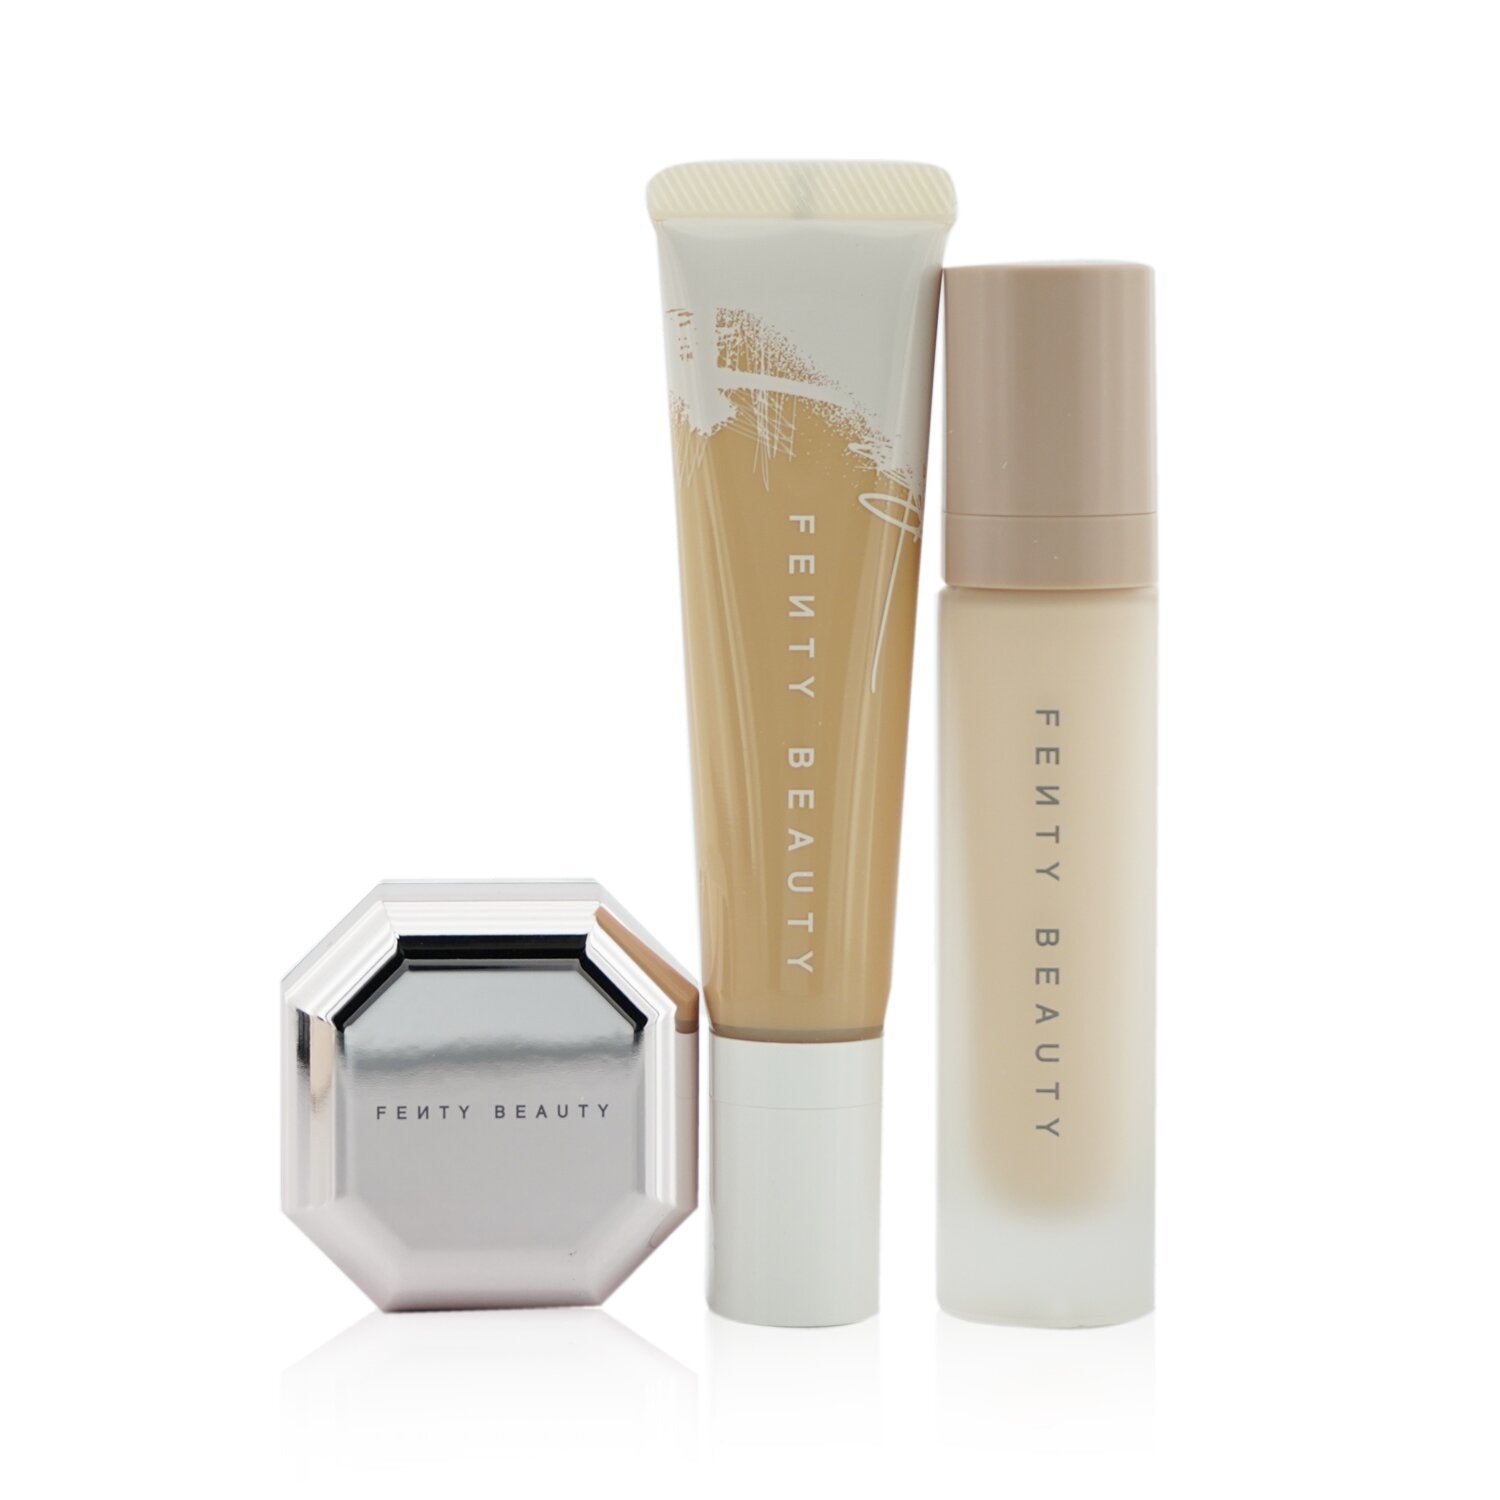  CHANEL New ! LES BEIGES Healthy Glow Sheer Colour Broad  Spectrum SPF 15 Suncreen No 10 - 12g/0.42oz : Face Powders : Beauty &  Personal Care